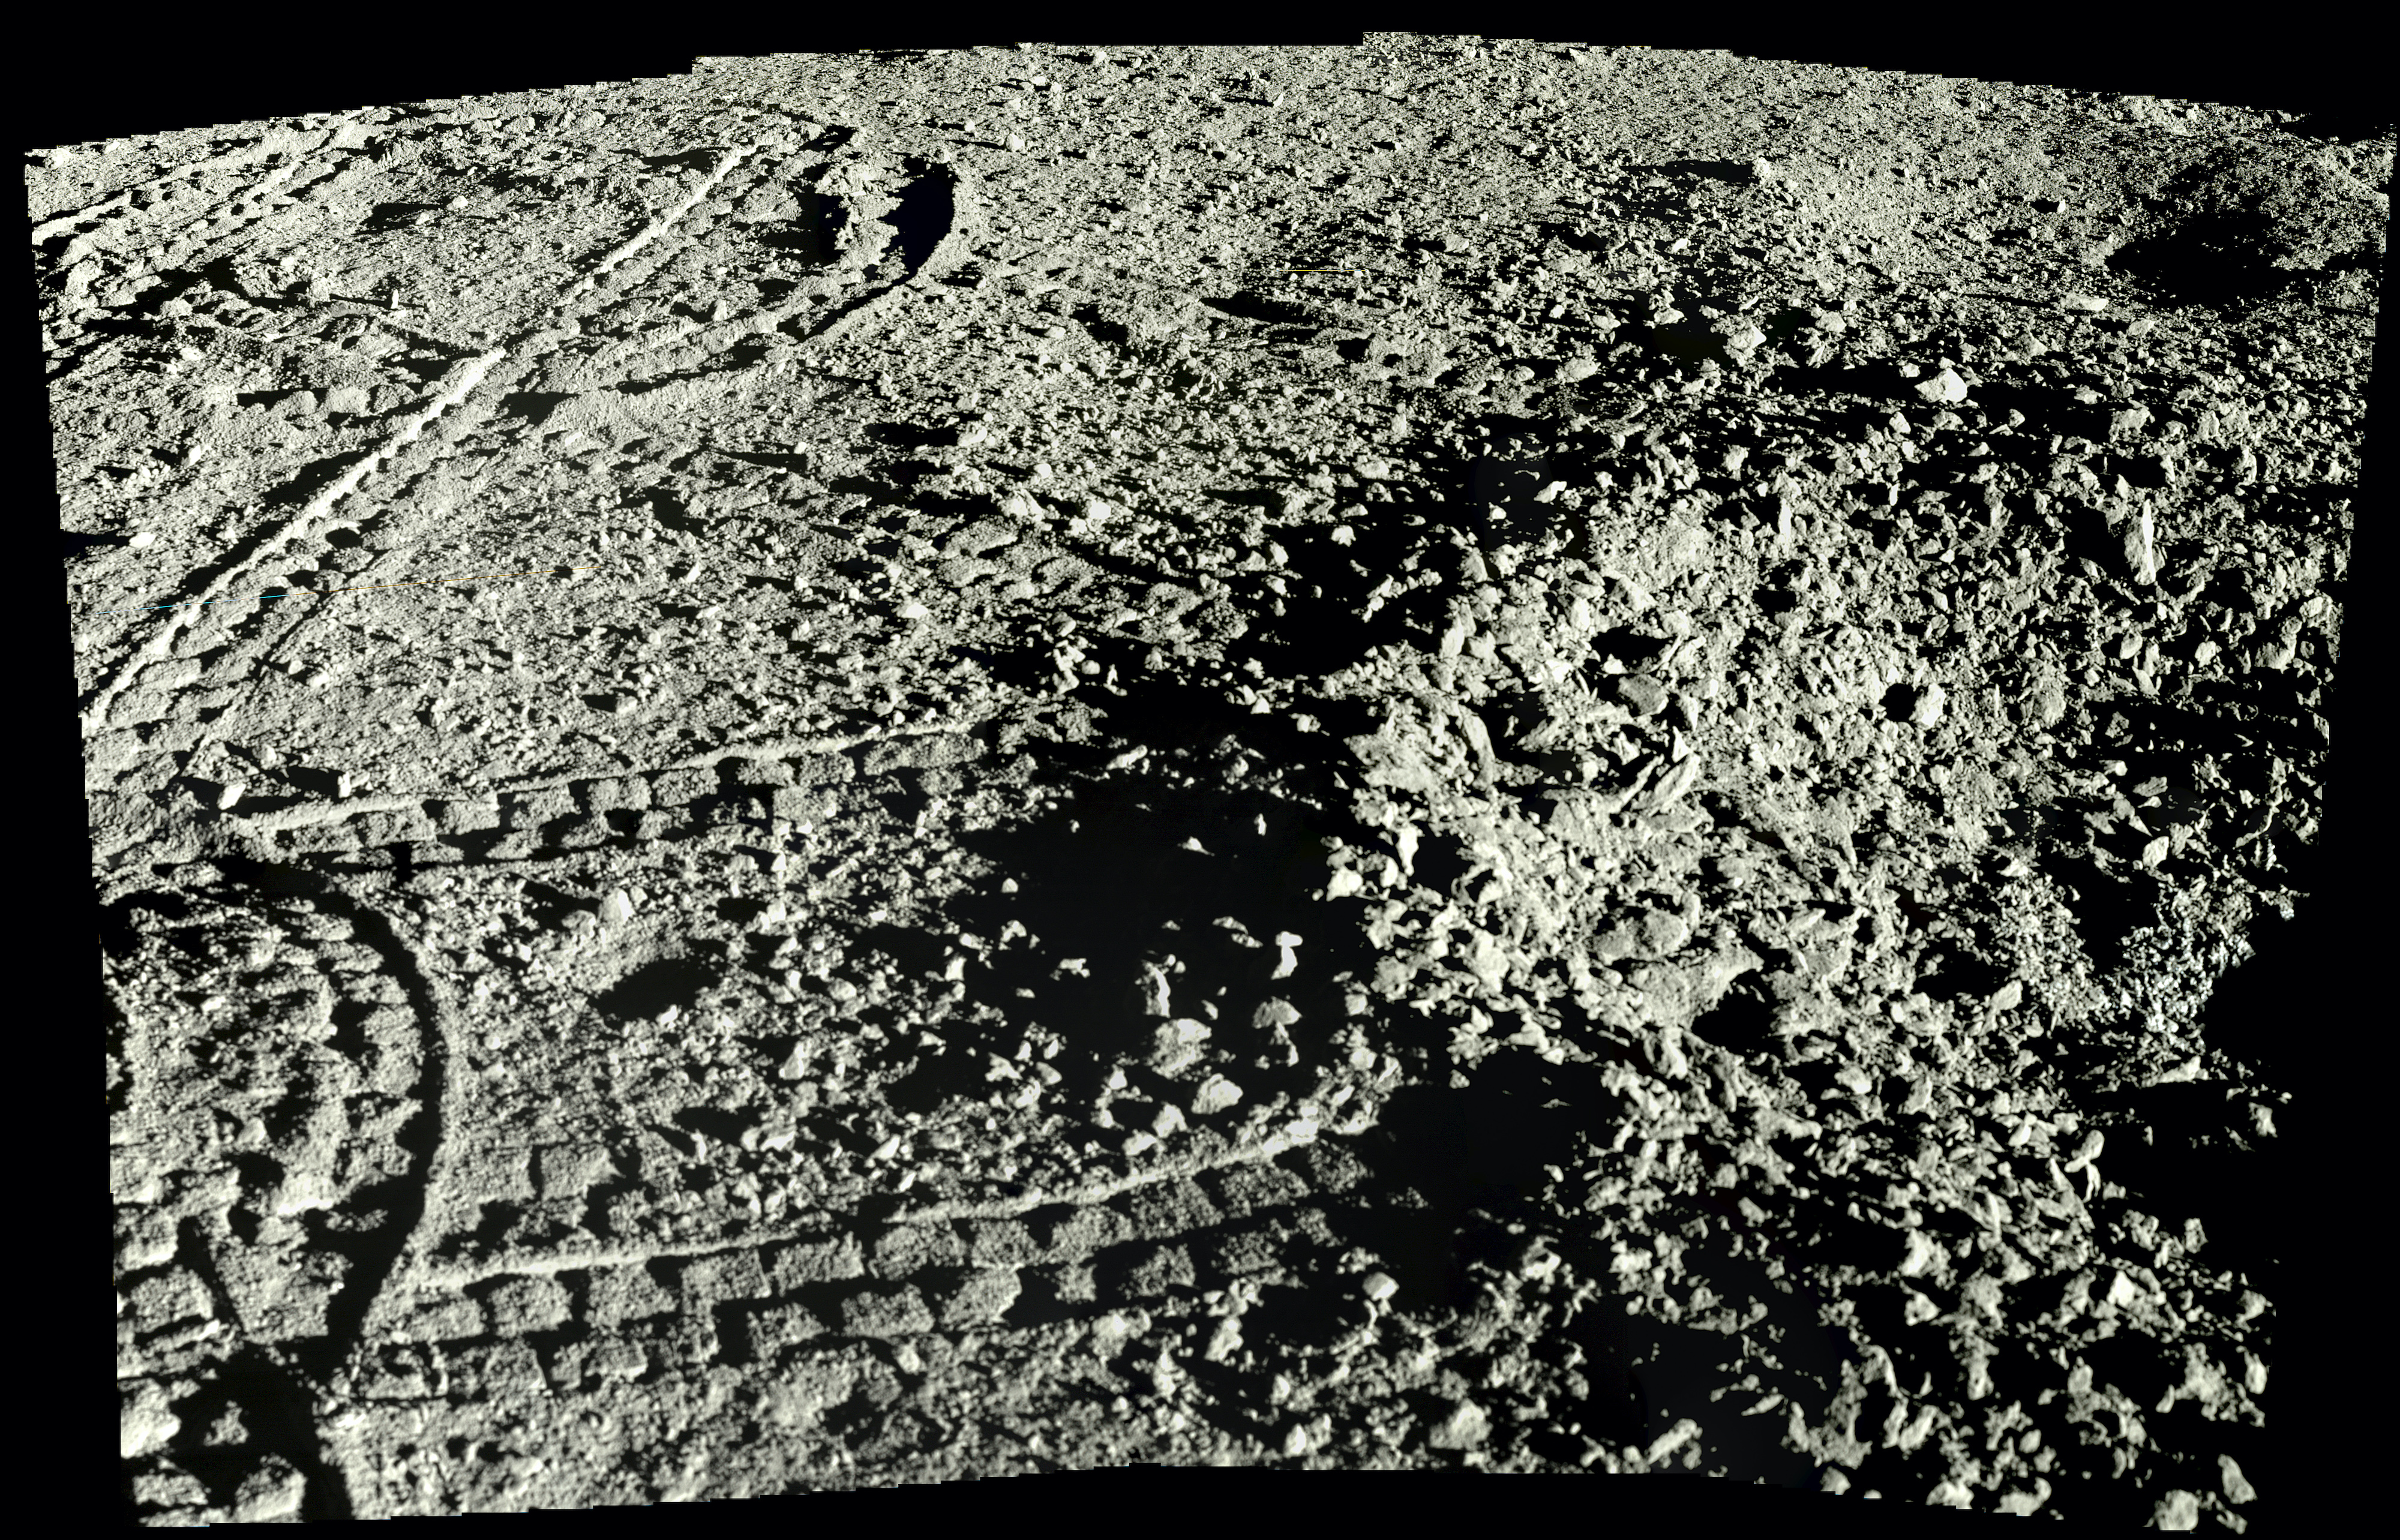 An up-close view of the lunar regolith from Yutu-2. You can see the rover's tracks in the soil.